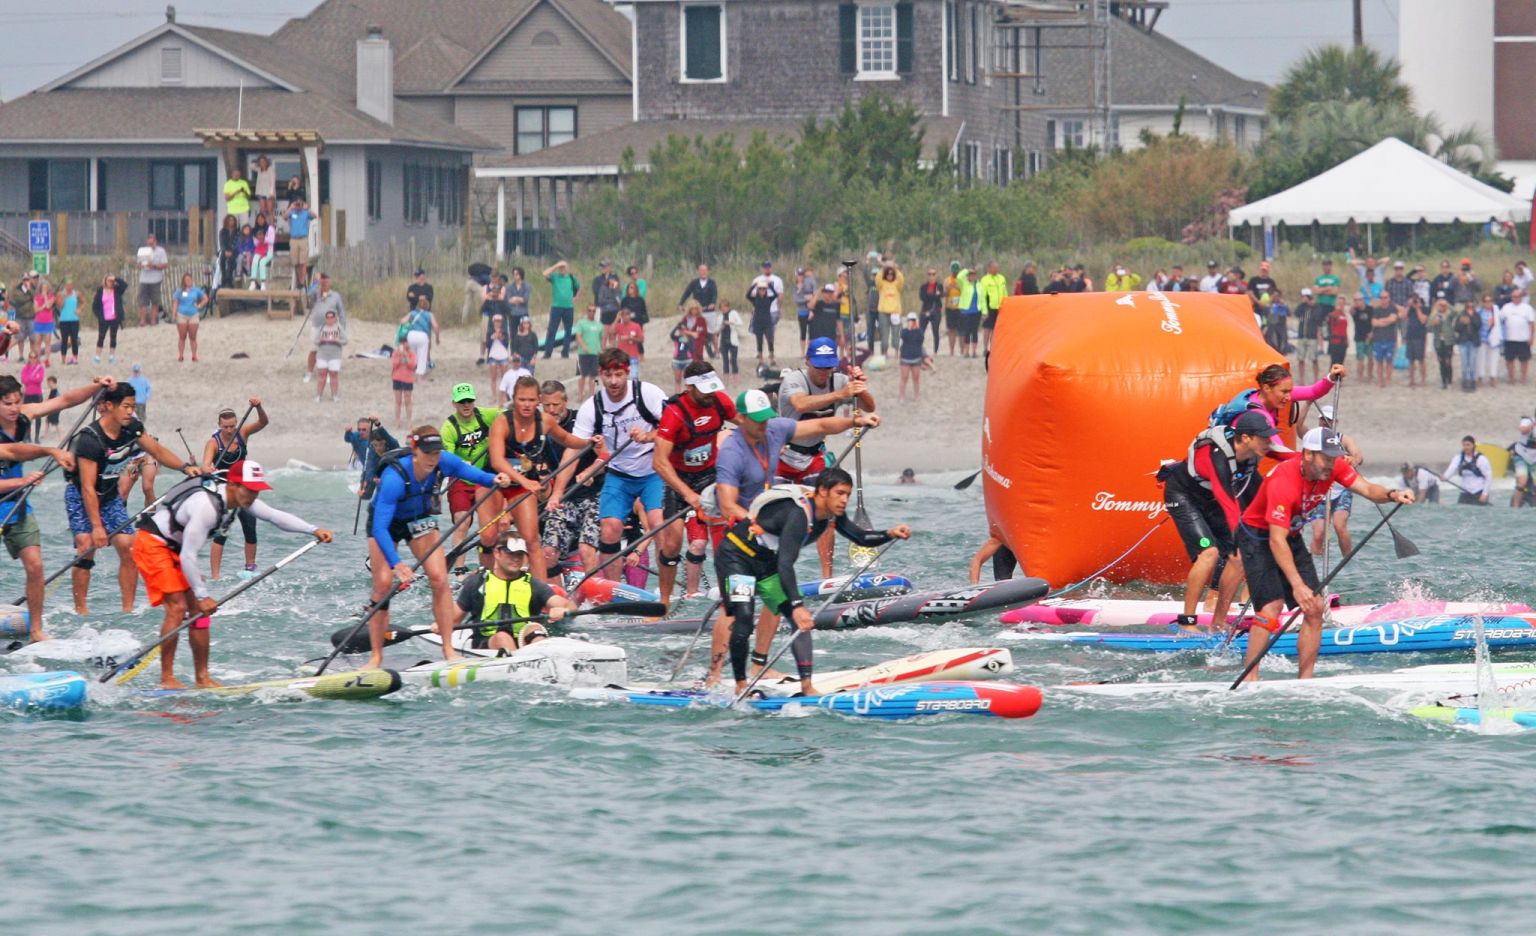 The WPA Launches 'World SUP Tour' Featuring 11 Major Regional and